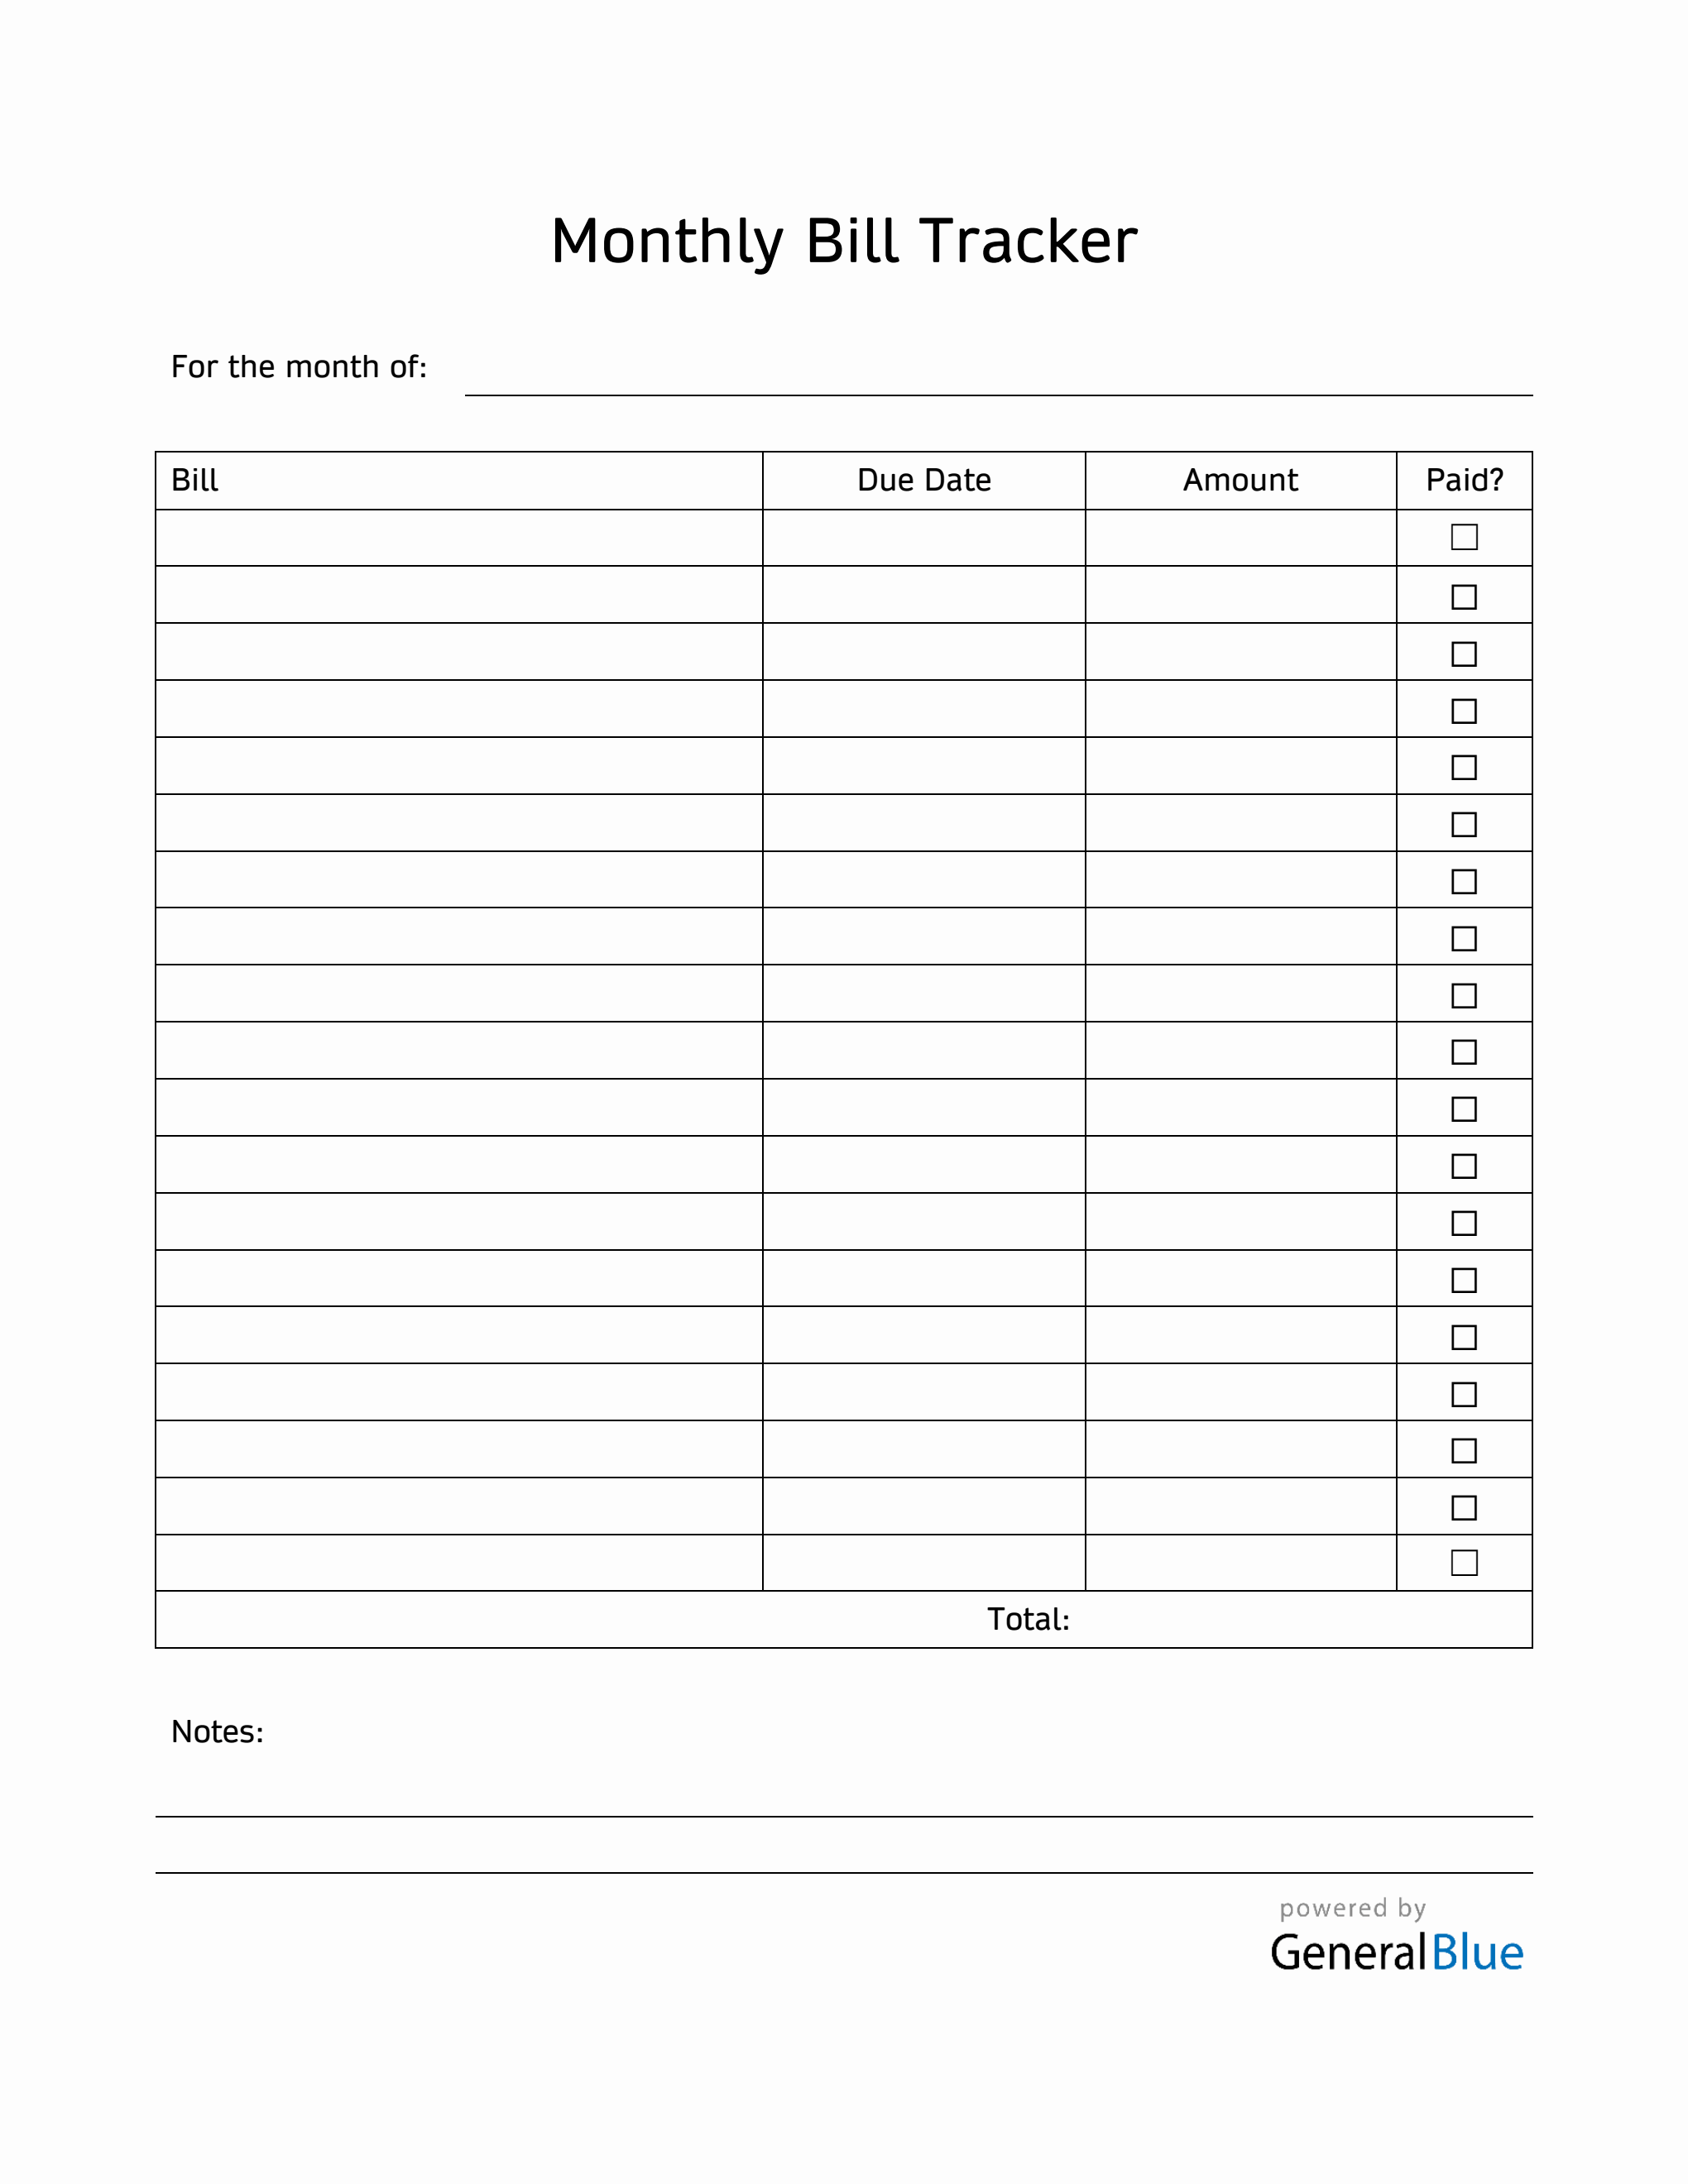 Monthly Bill Tracker in PDF (Printable)